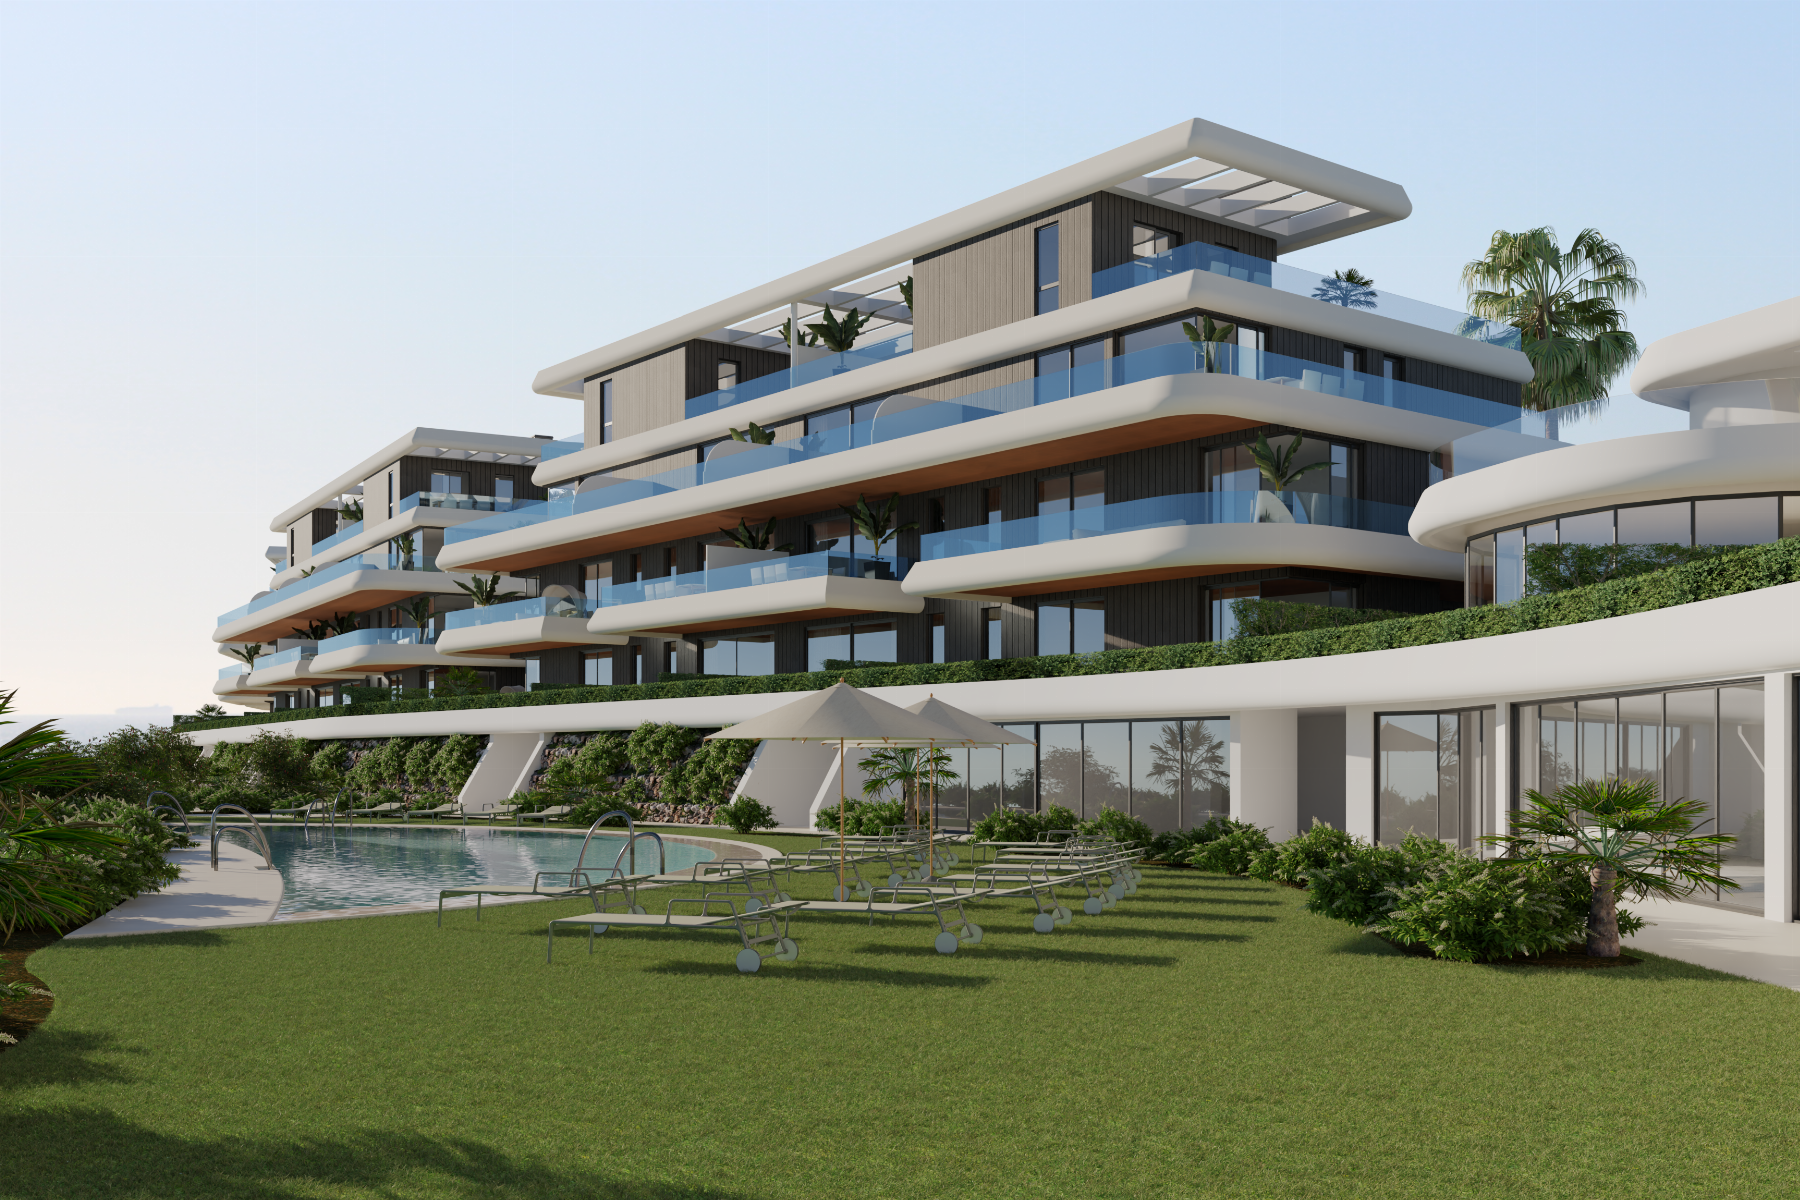 Alchemist Residences: Sea-view contemporary apartments and penthouses.